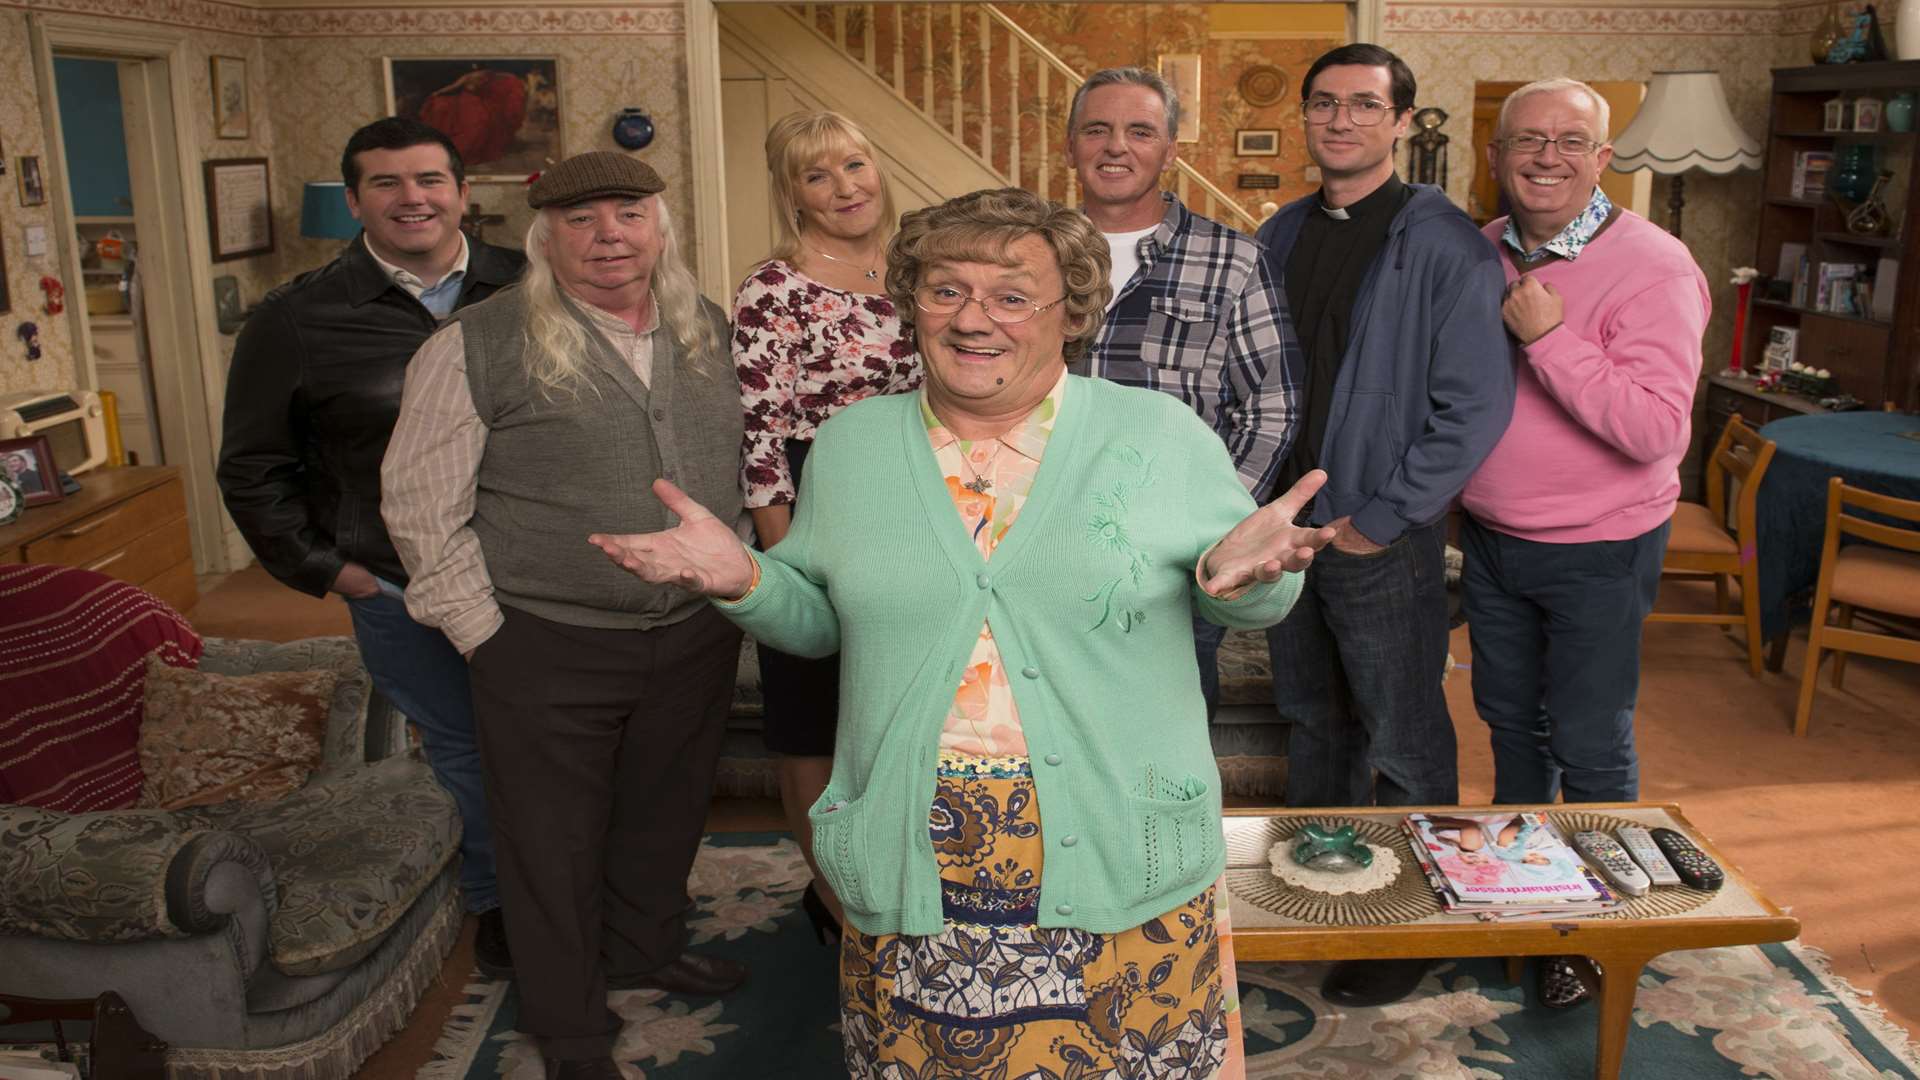 Mrs Brown's Boys D'Movie, with Brendan O'Carroll as Agnes Brown. Picture: PA Photo/UPI Media